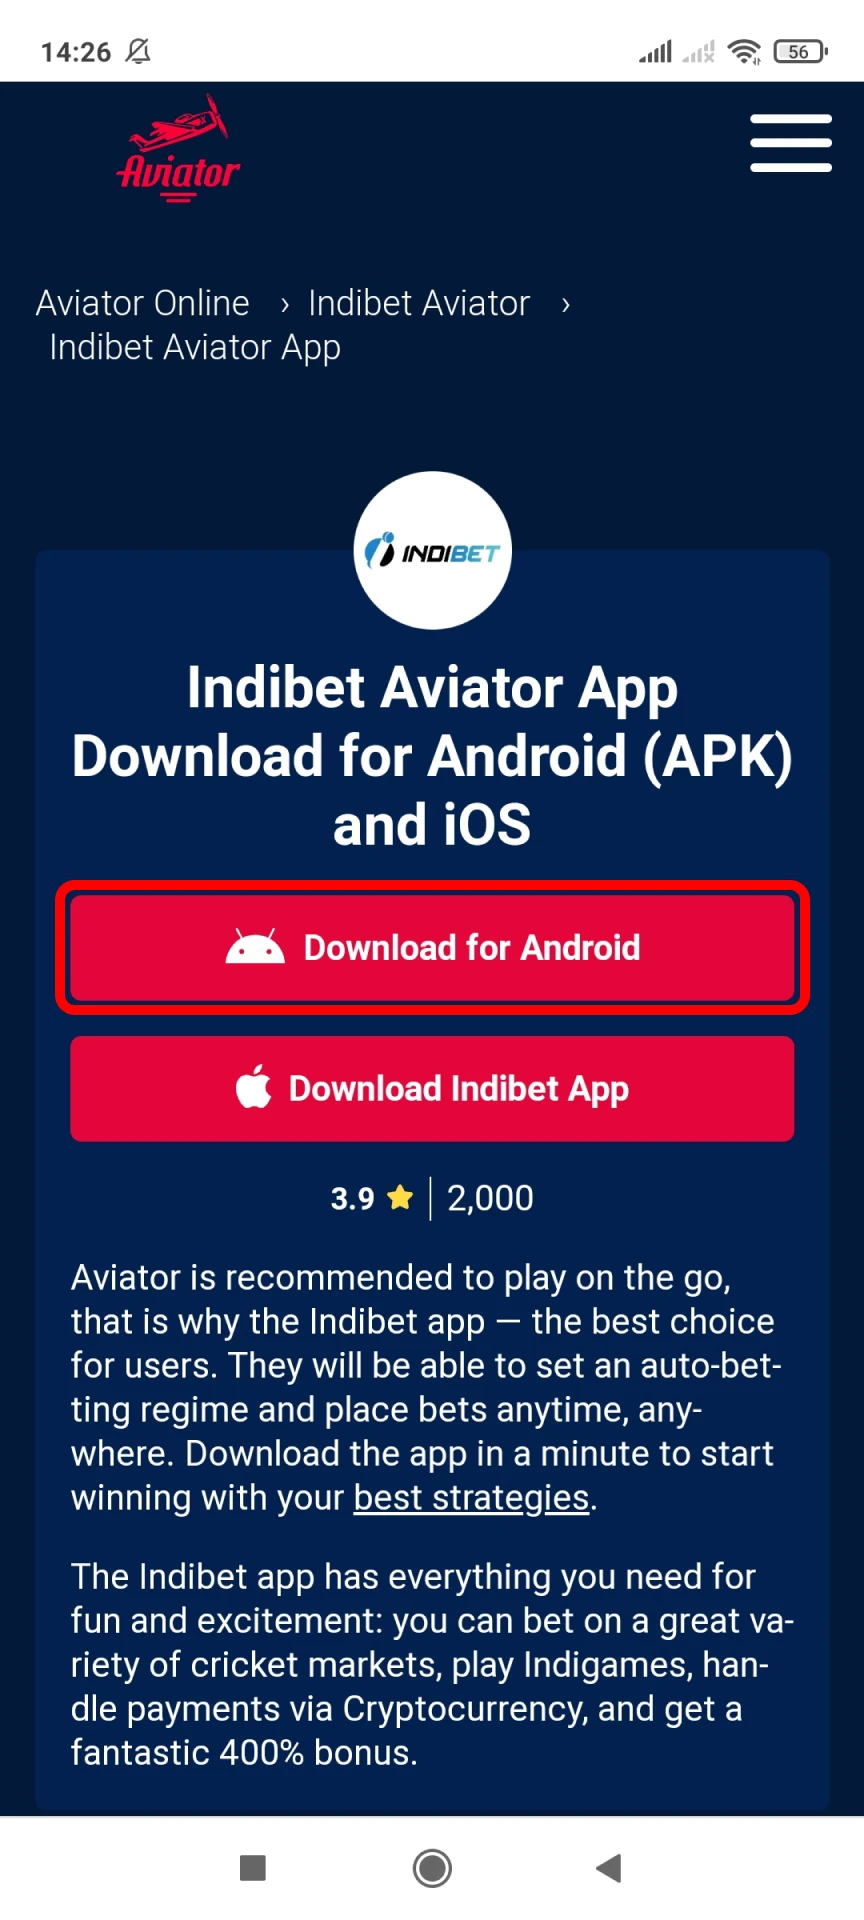 Go to the Indibet page to download the application.